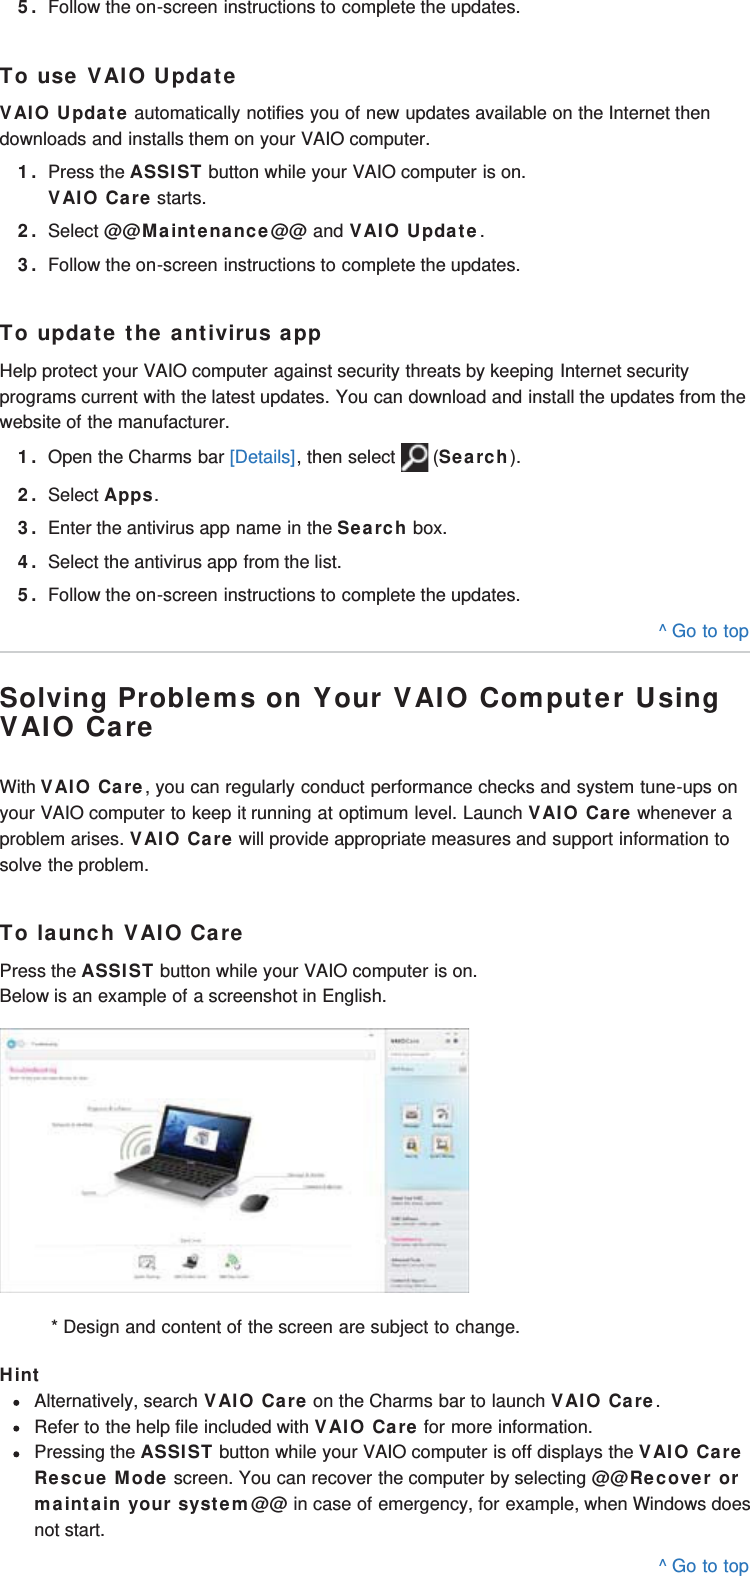 5. Follow the on-screen instructions to complete the updates.To use VAIO UpdateVAIO Update automatically notifies you of new updates available on the Internet thendownloads and installs them on your VAIO computer.1. Press the ASSIST button while your VAIO computer is on.VAIO Care starts.2. Select @@Maintenance@@ and VAIO Update.3. Follow the on-screen instructions to complete the updates.To update the antivirus appHelp protect your VAIO computer against security threats by keeping Internet securityprograms current with the latest updates. You can download and install the updates from thewebsite of the manufacturer.1. Open the Charms bar [Details], then select   (Search).2. Select Apps.3. Enter the antivirus app name in the Search box.4. Select the antivirus app from the list.5. Follow the on-screen instructions to complete the updates.^ Go to topSolving Problems on Your VAIO Computer UsingVAIO CareWith VAIO Care, you can regularly conduct performance checks and system tune-ups onyour VAIO computer to keep it running at optimum level. Launch VAIO Care whenever aproblem arises. VAIO Care will provide appropriate measures and support information tosolve the problem.To launch VAIO CarePress the ASSIST button while your VAIO computer is on.Below is an example of a screenshot in English.* Design and content of the screen are subject to change.HintAlternatively, search VAIO Care on the Charms bar to launch VAIO Care.Refer to the help file included with VAIO Care for more information.Pressing the ASSIST button while your VAIO computer is off displays the VAIO CareRescue Mode screen. You can recover the computer by selecting @@Recover ormaintain your system@@ in case of emergency, for example, when Windows doesnot start.^ Go to top